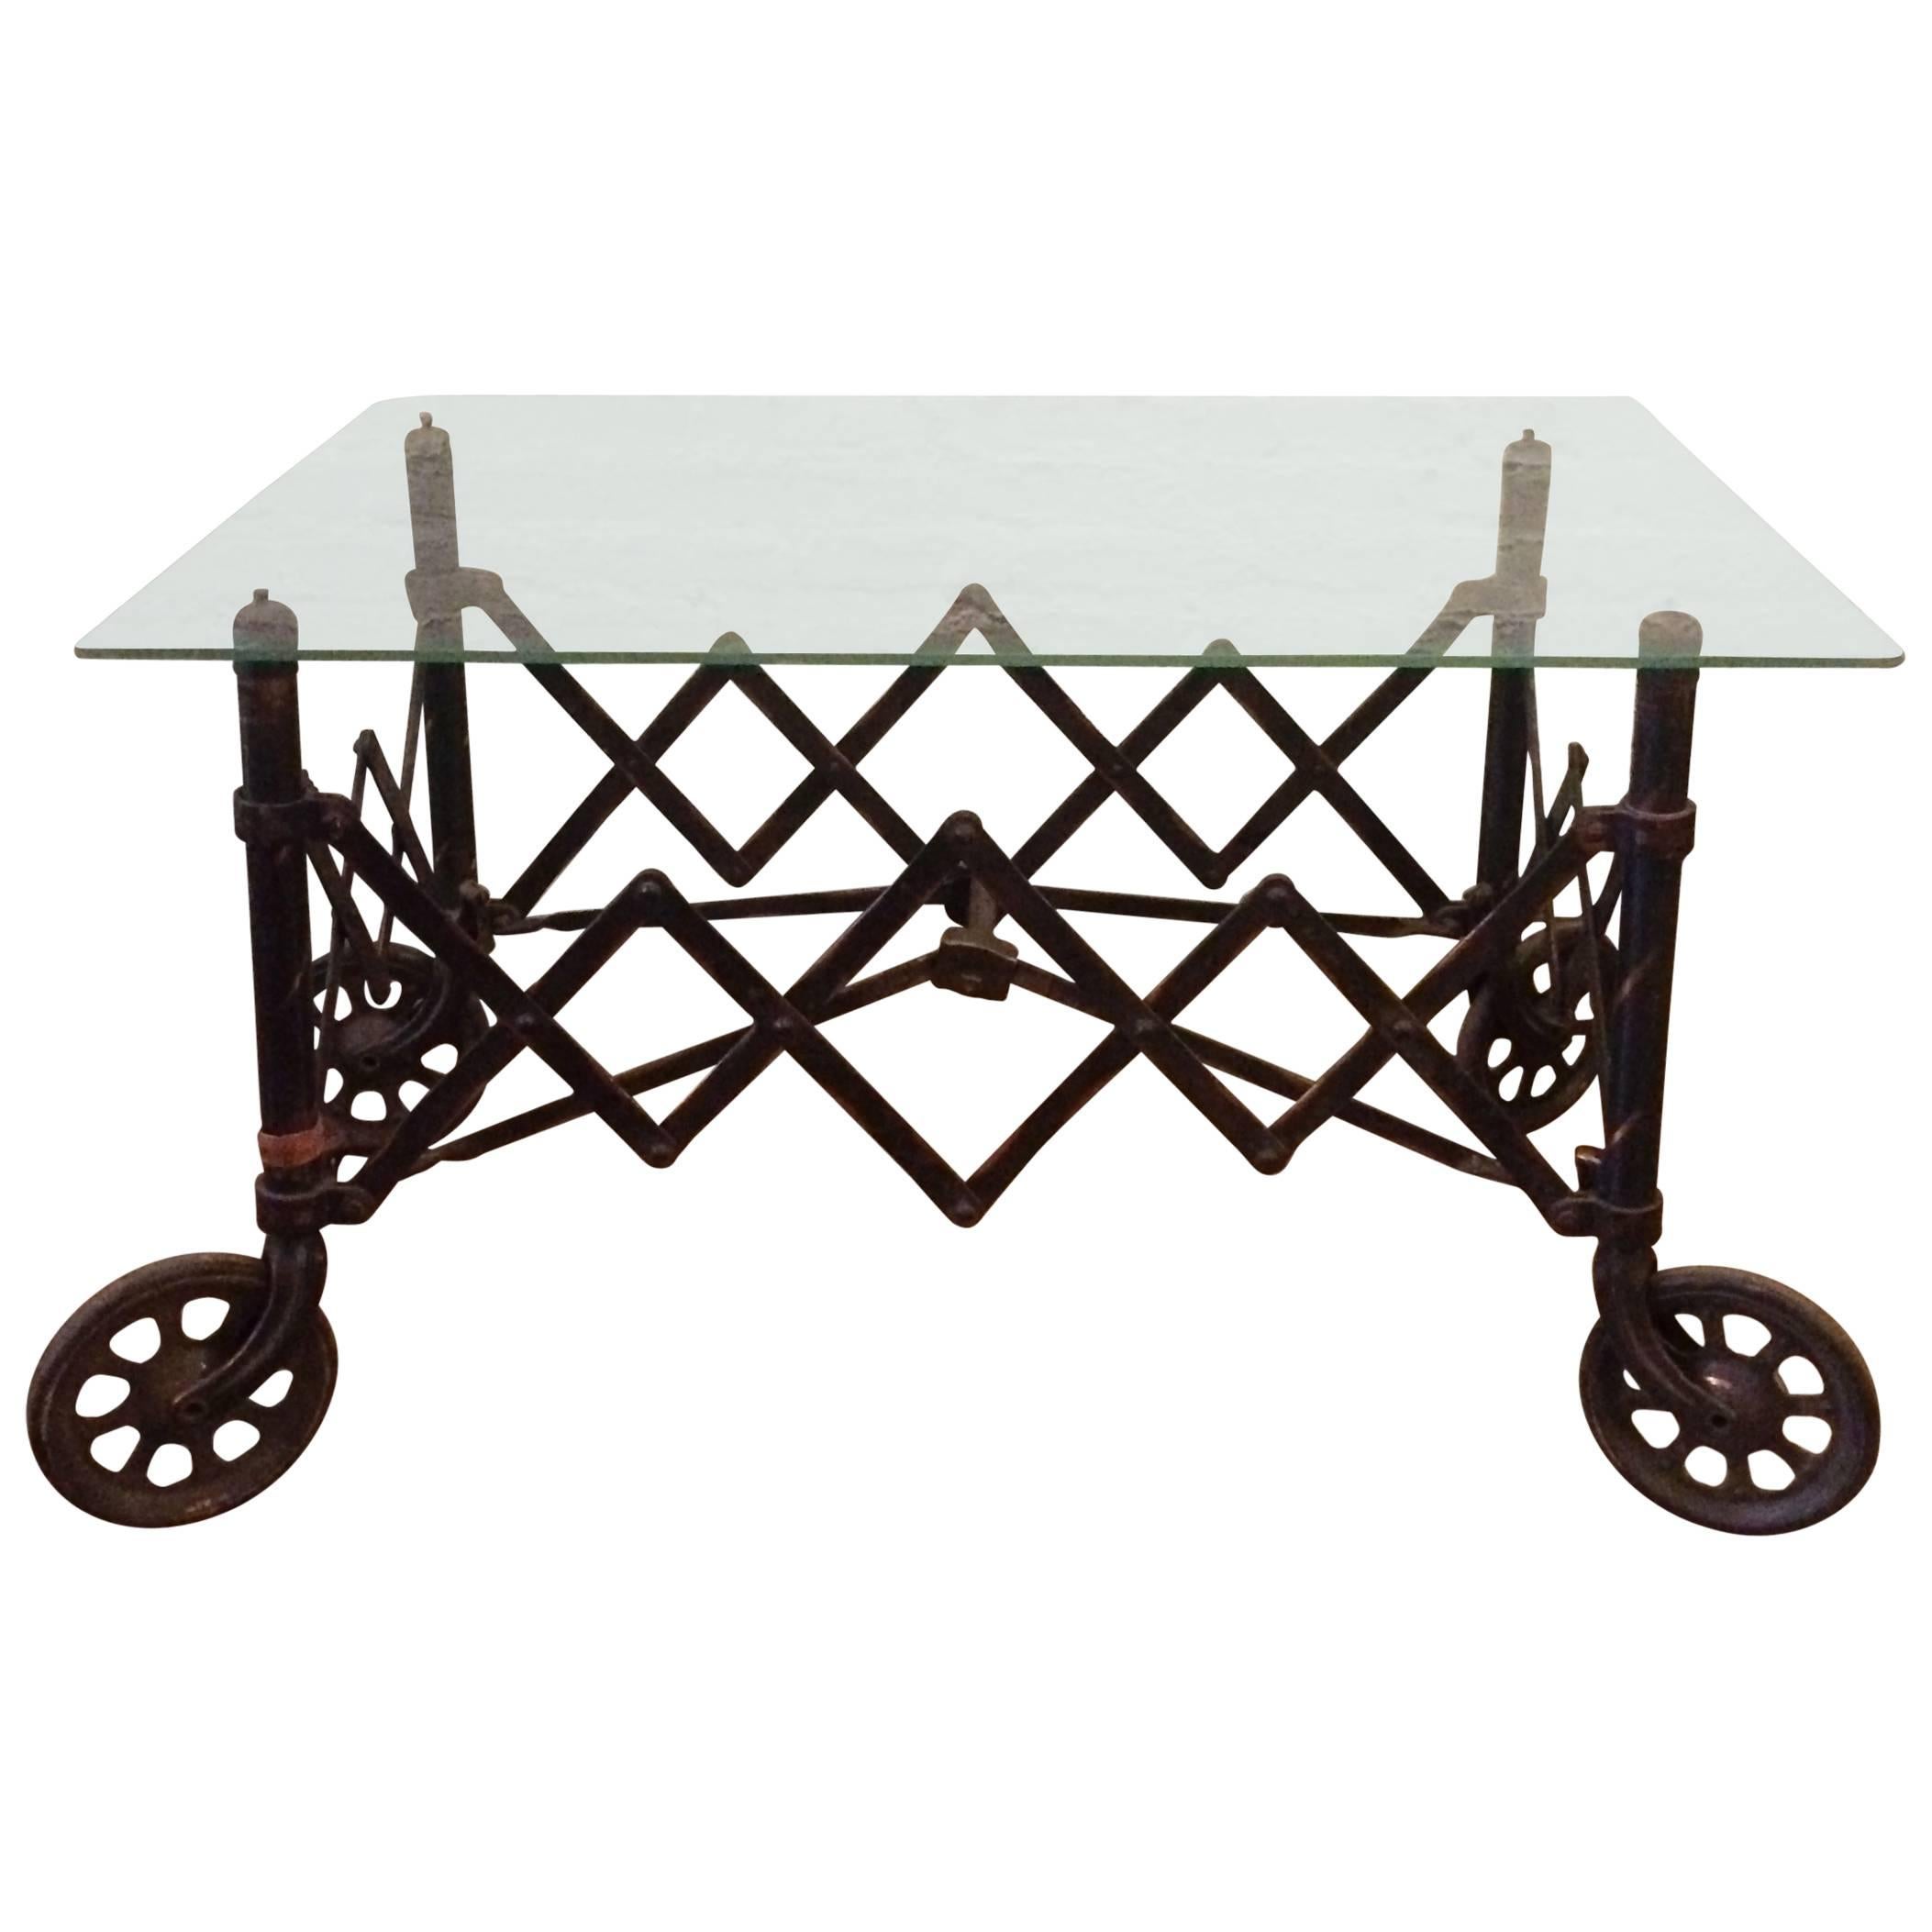 1920s Glass Top Copper Oxide Steel Industrial Coffee Table For Sale